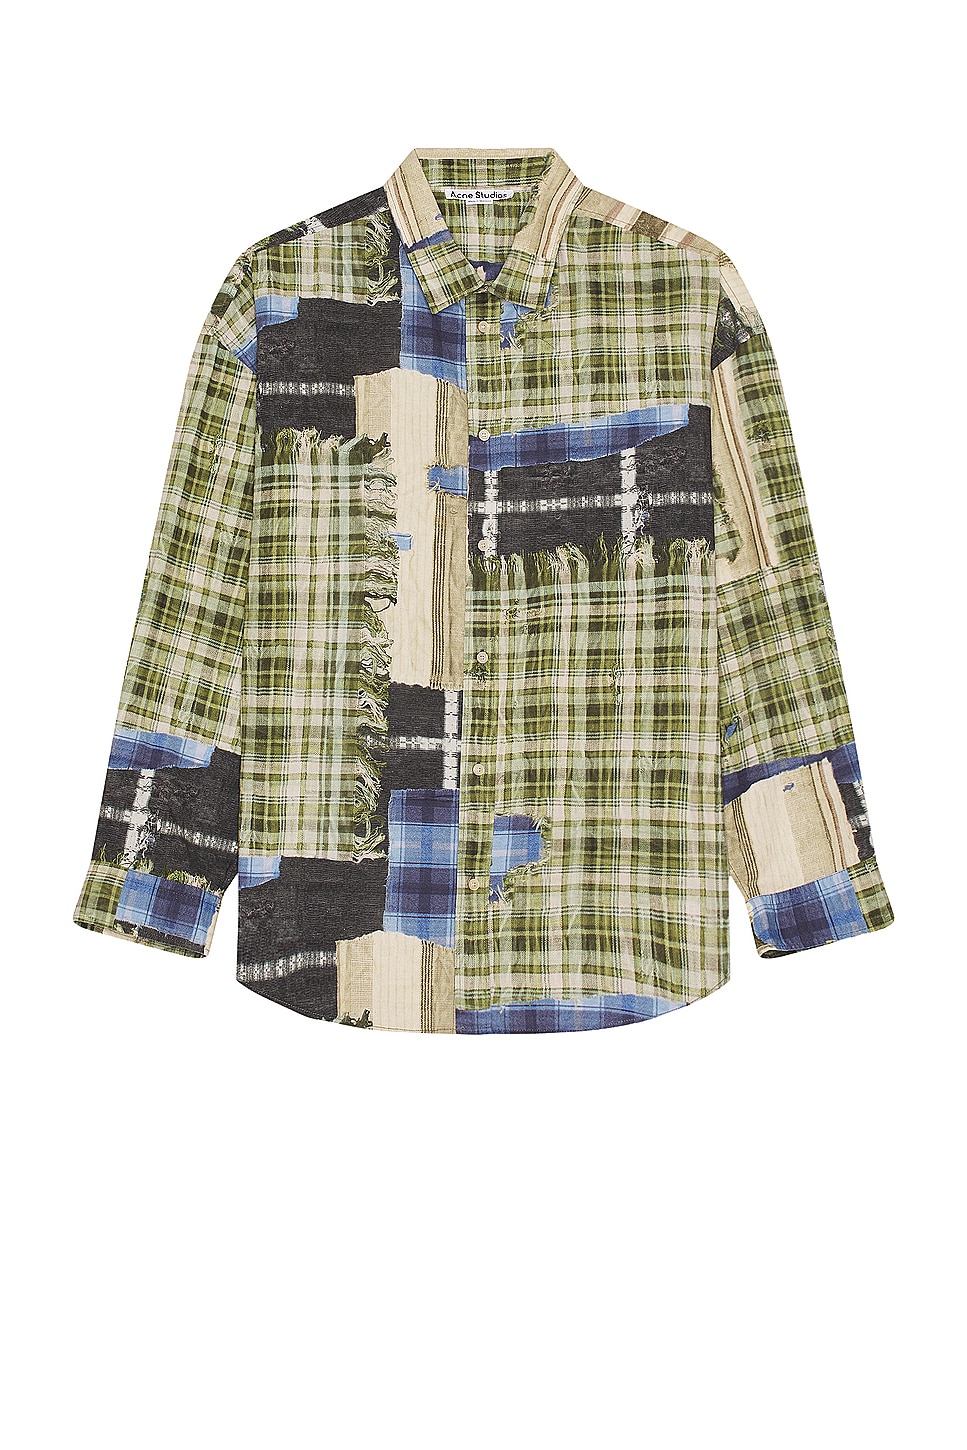 Image 1 of Acne Studios Patchwork Shirt in Green Multi